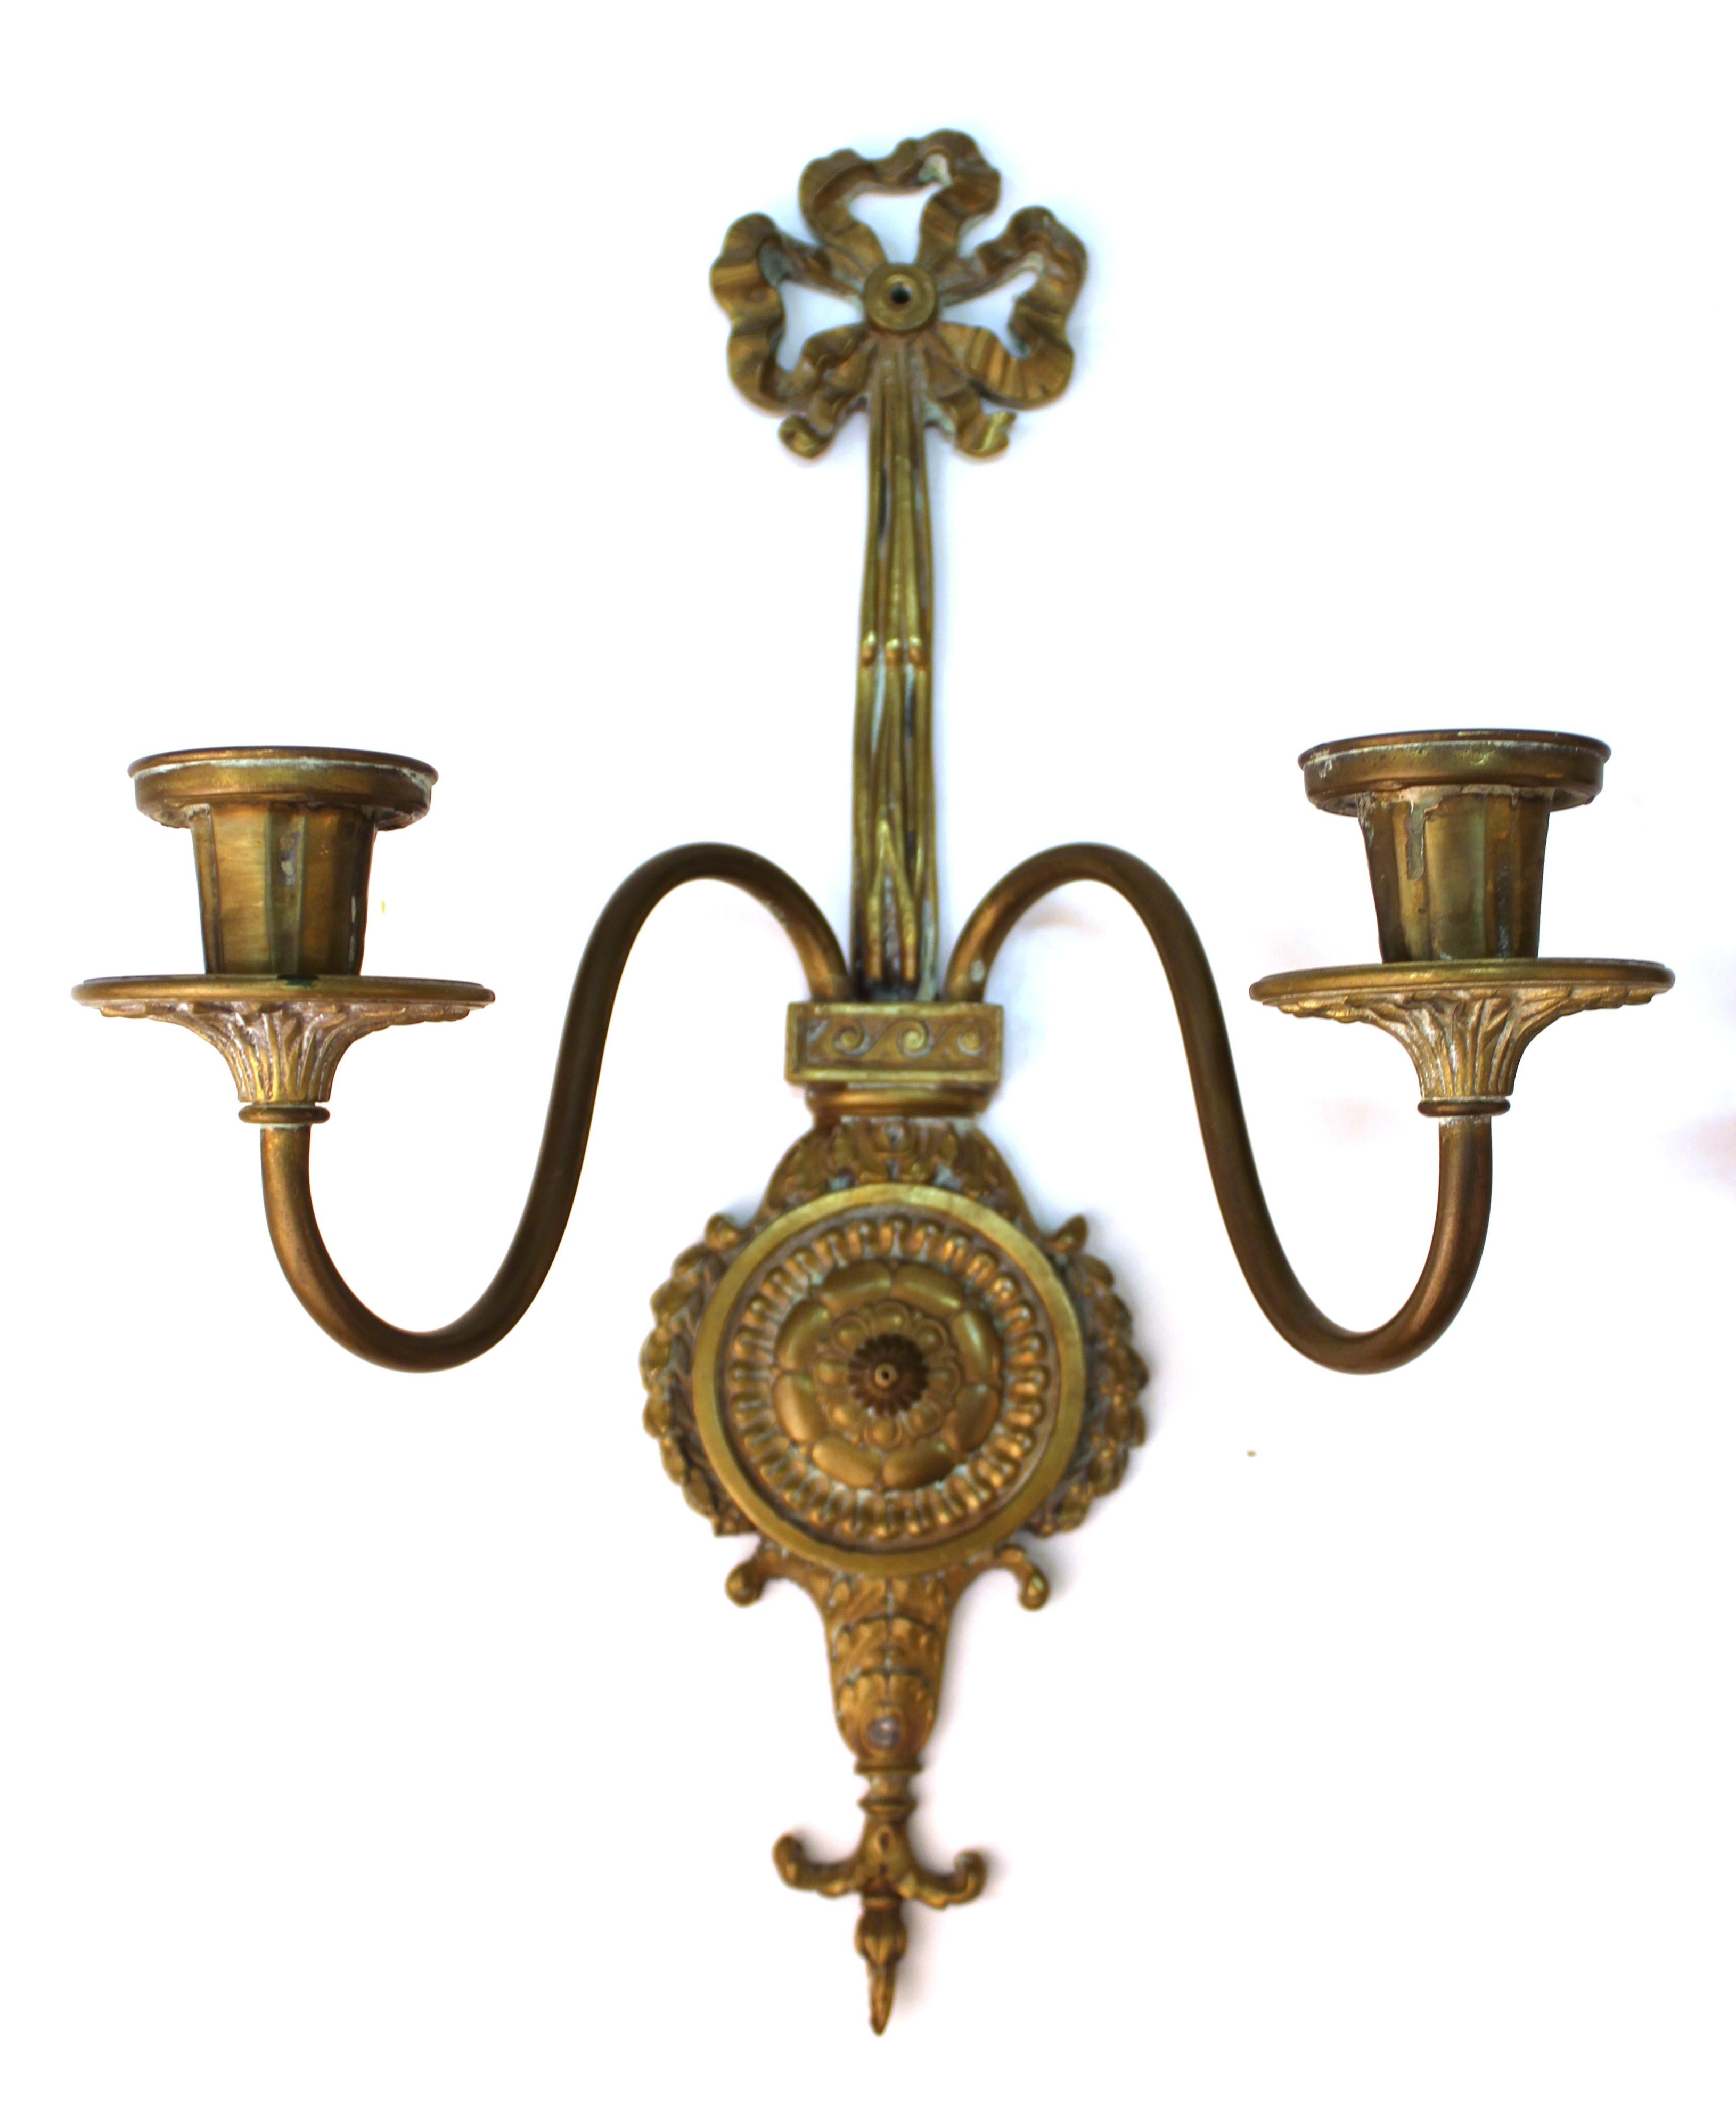 O.C. White Company American neoclassical style pair of gilt brass candelabra wall sconces, dating from the 1920s and cast in ribbons, rosettes and leaves. The backs have factory stamps 